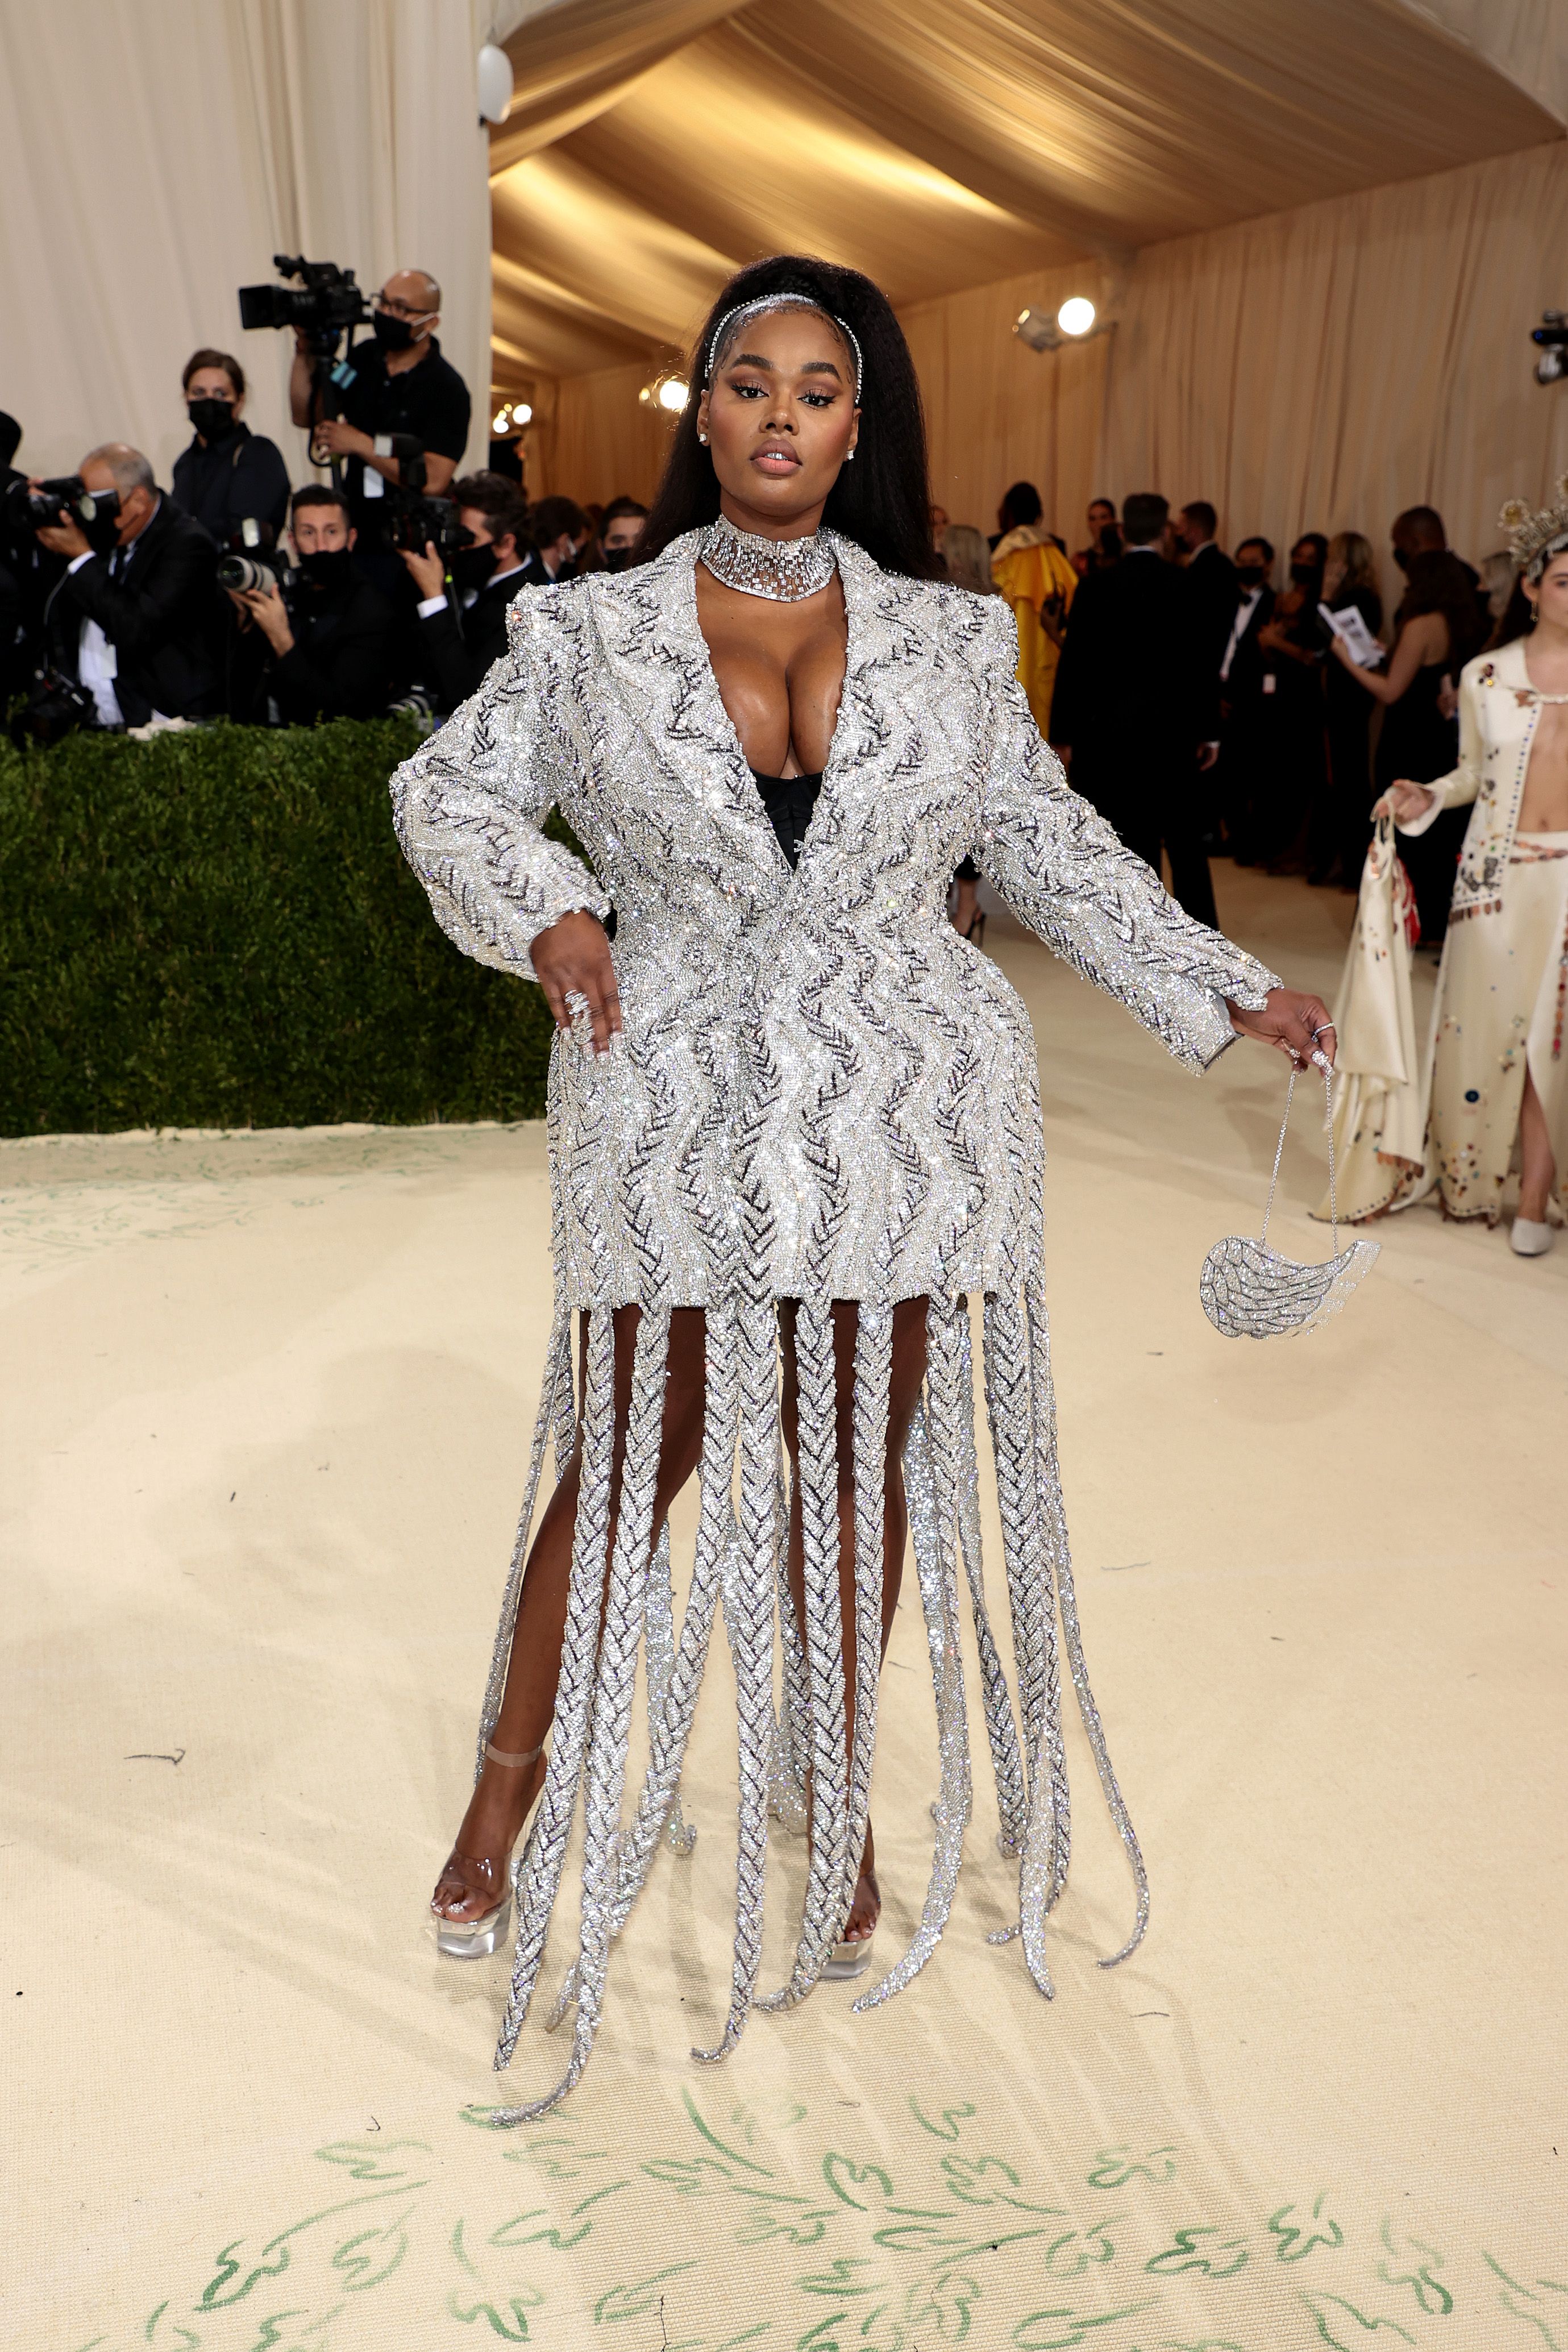 Met Gala 2021: Precious Lee Had the Sparkliest Red-Carpet Suiting